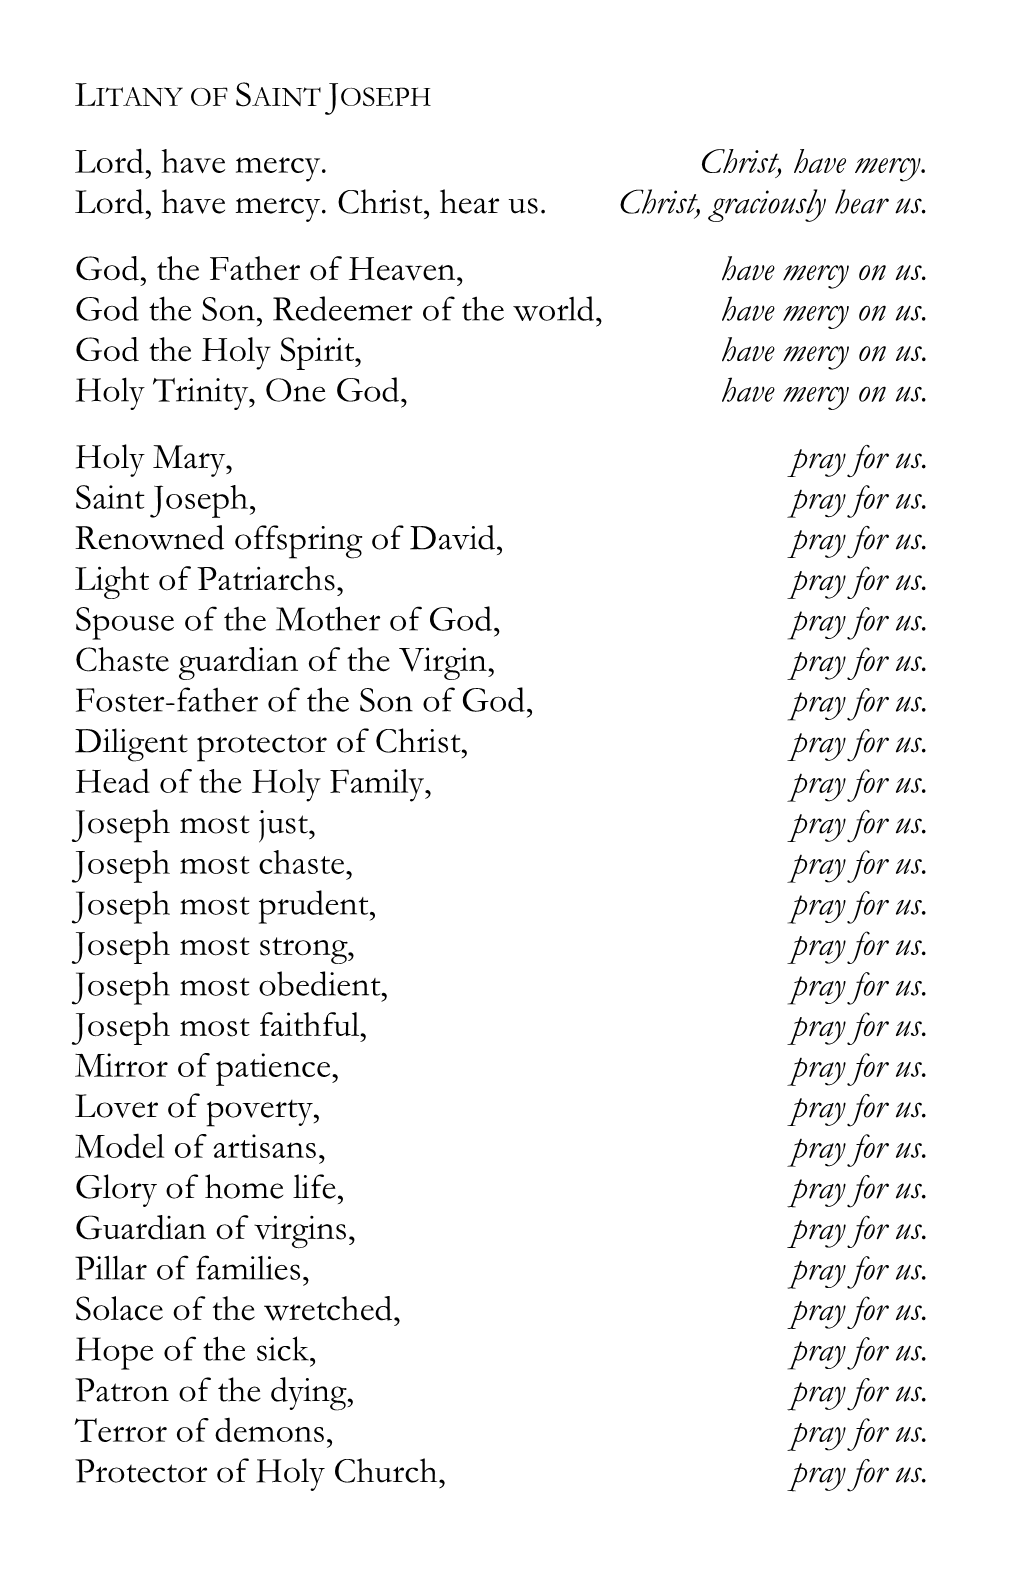 Litany of St. Joseph and Litany of Patron Saints for Family and Clergy